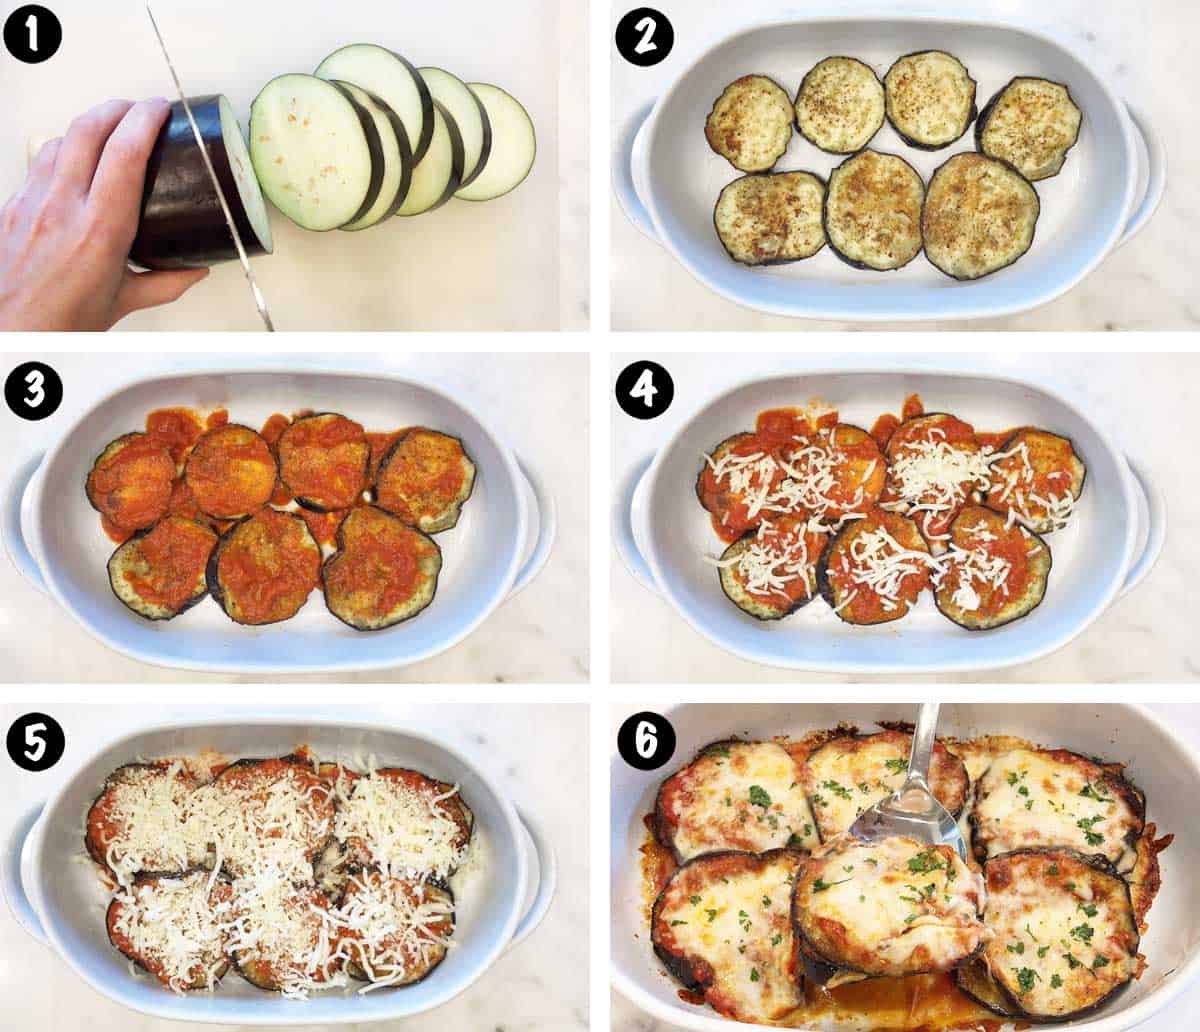 A six-photo collage showing the steps for making an eggplant casserole.